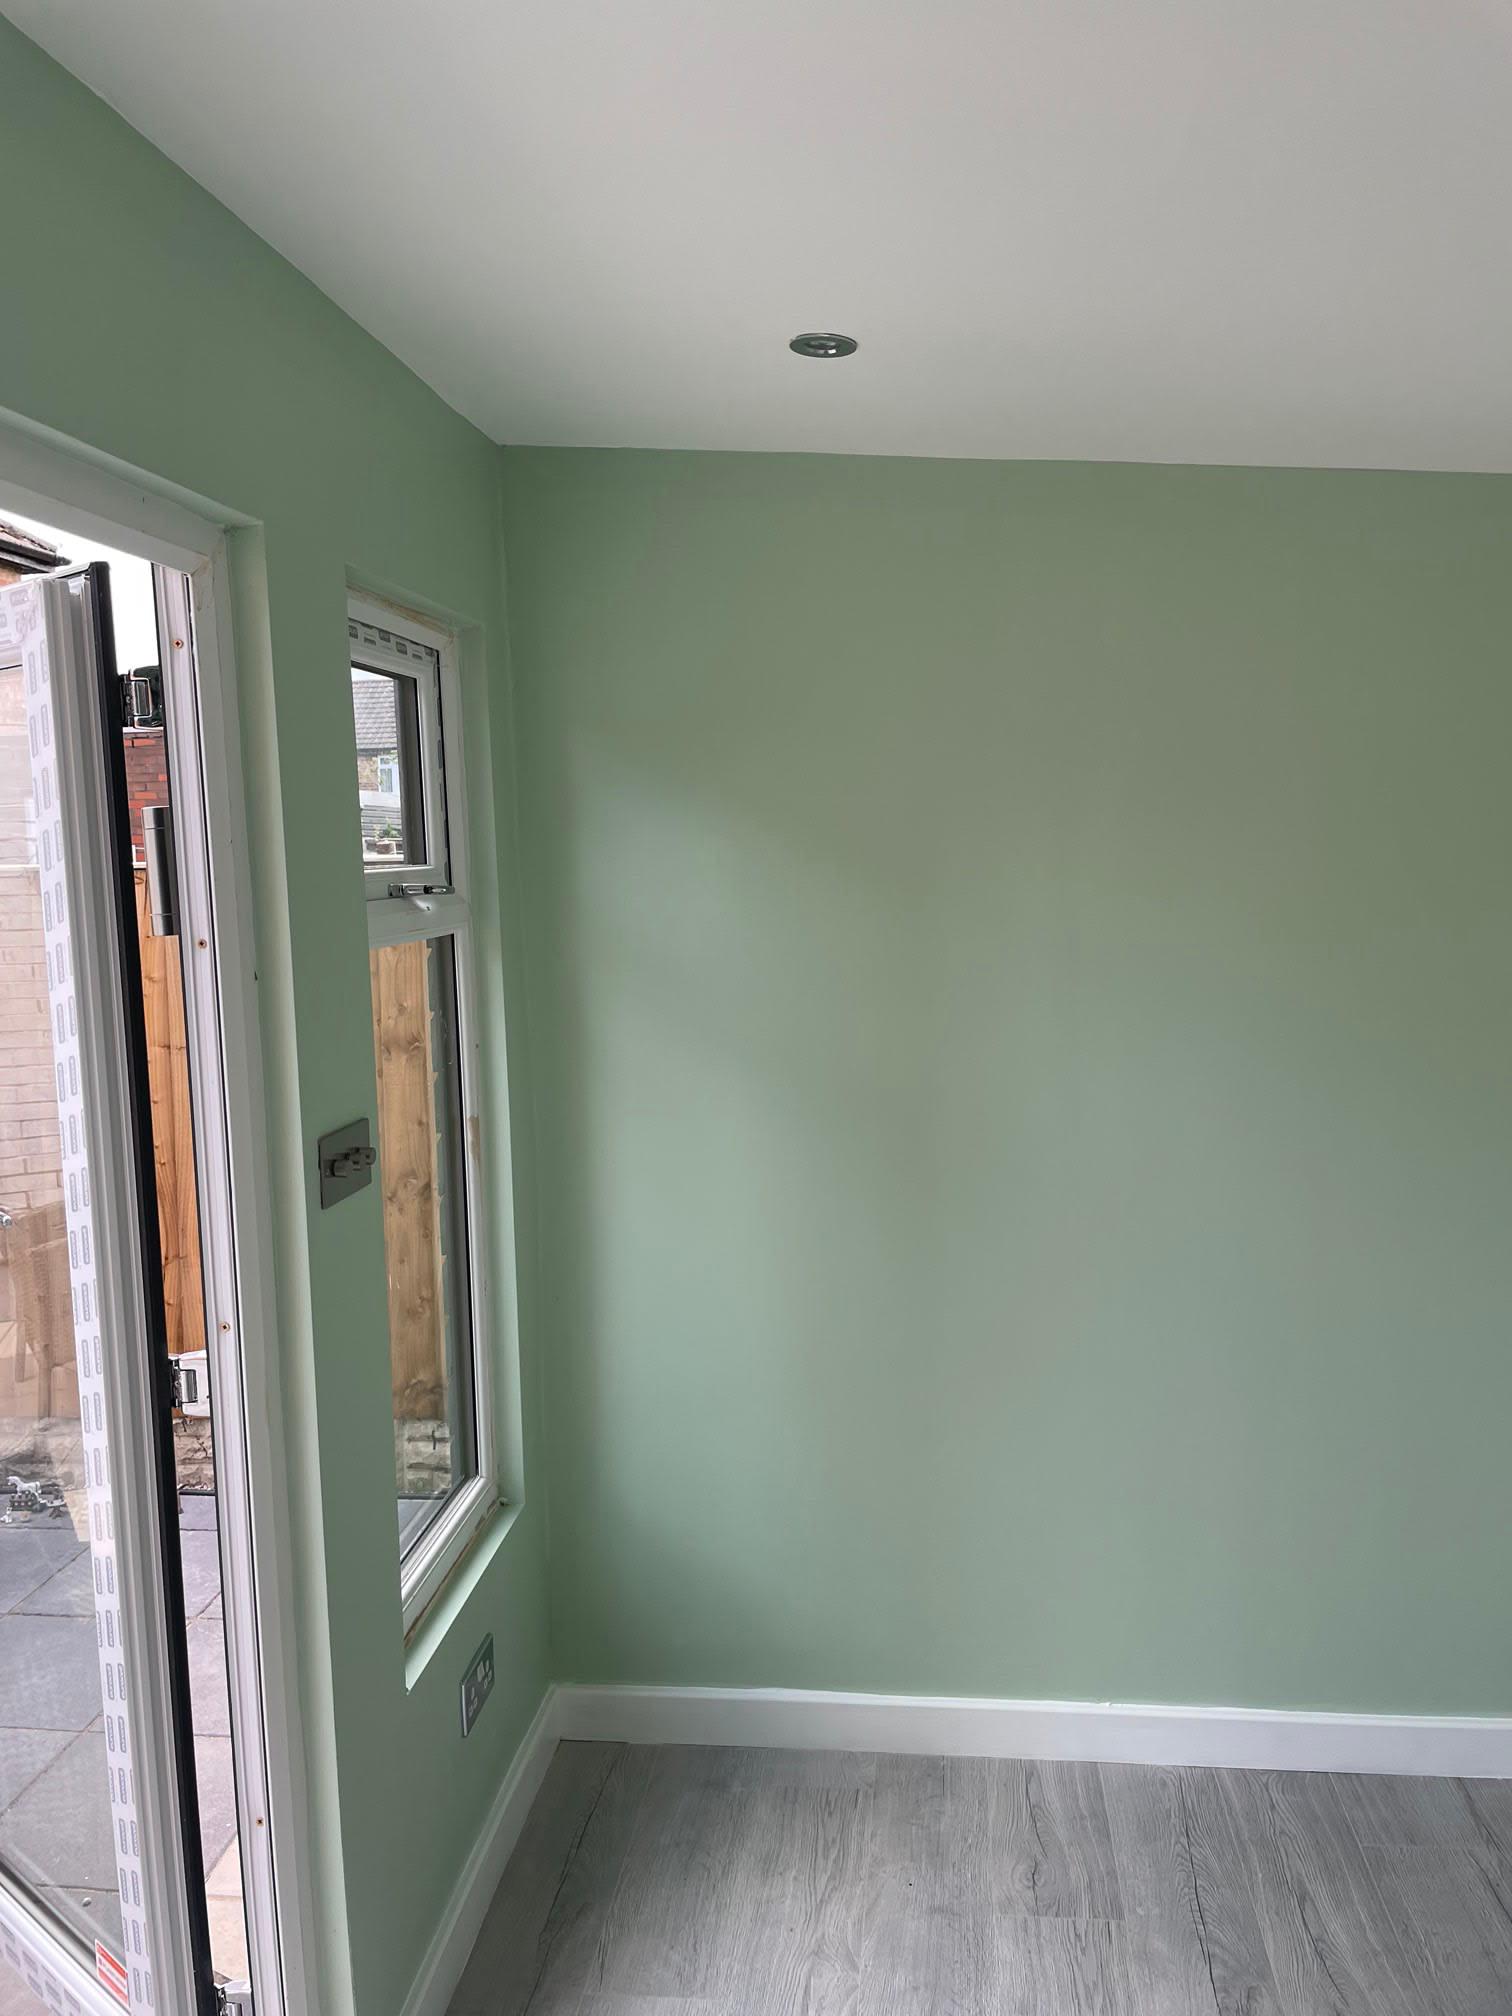 Images Iain Young Painter & Decorators